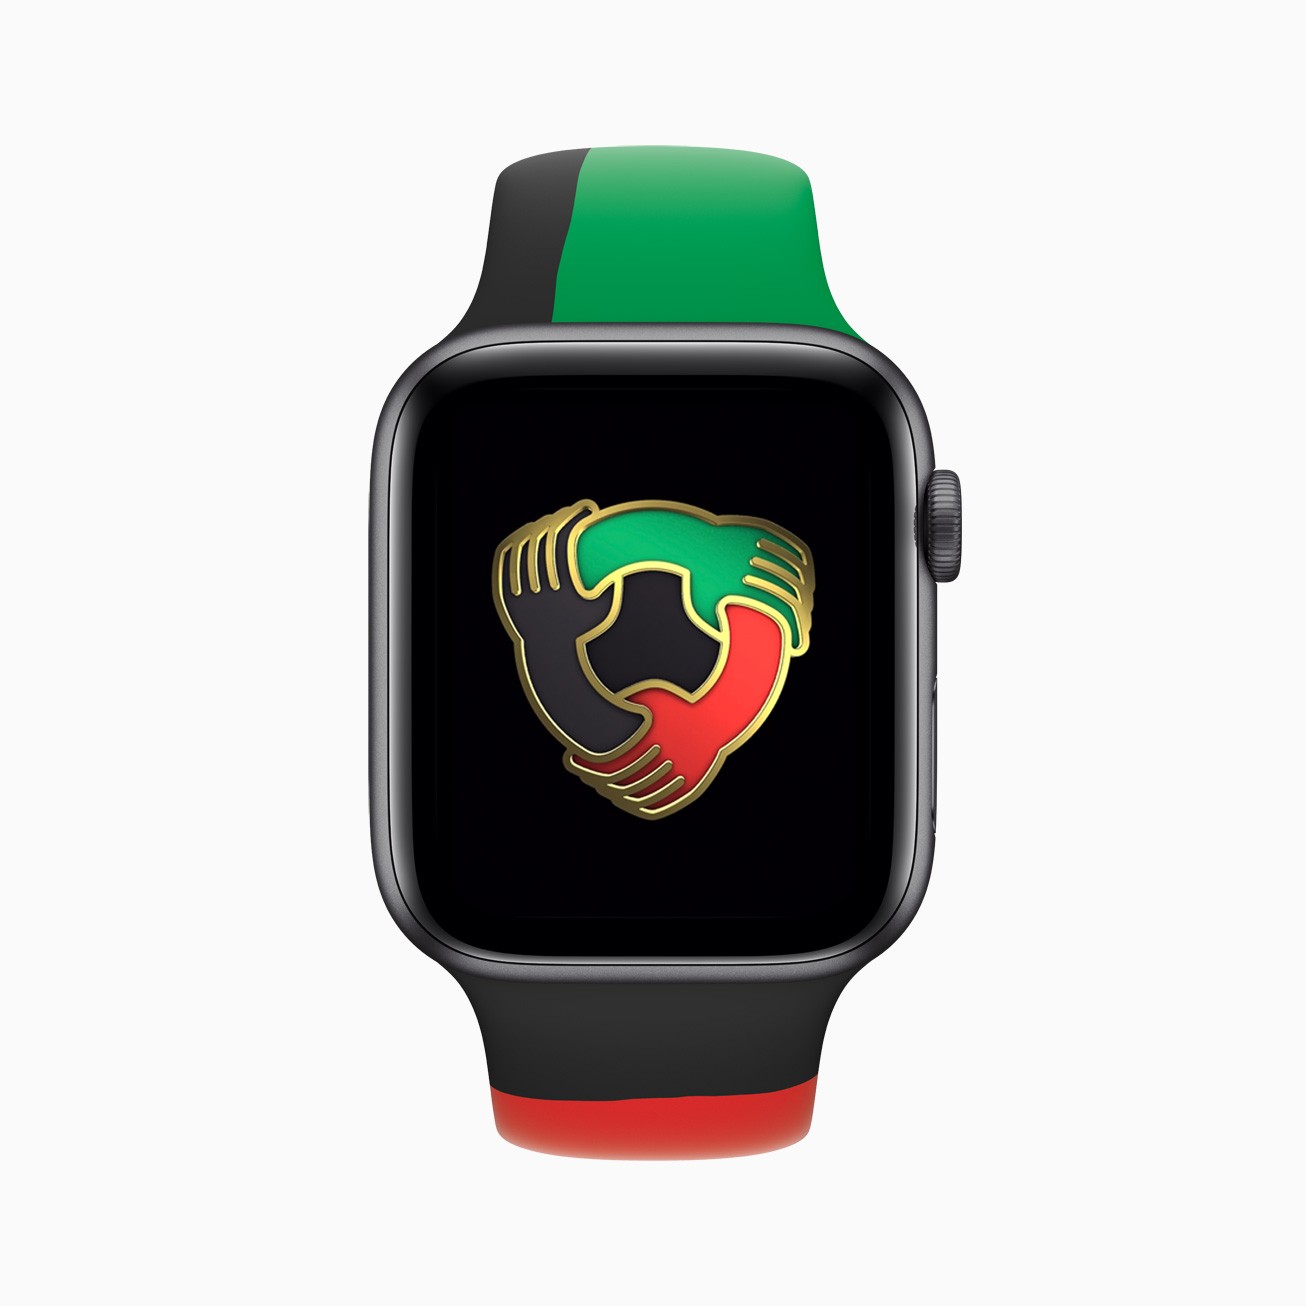 Apple Launches Limited-Edition Apple Watch Series 6 Black Unity